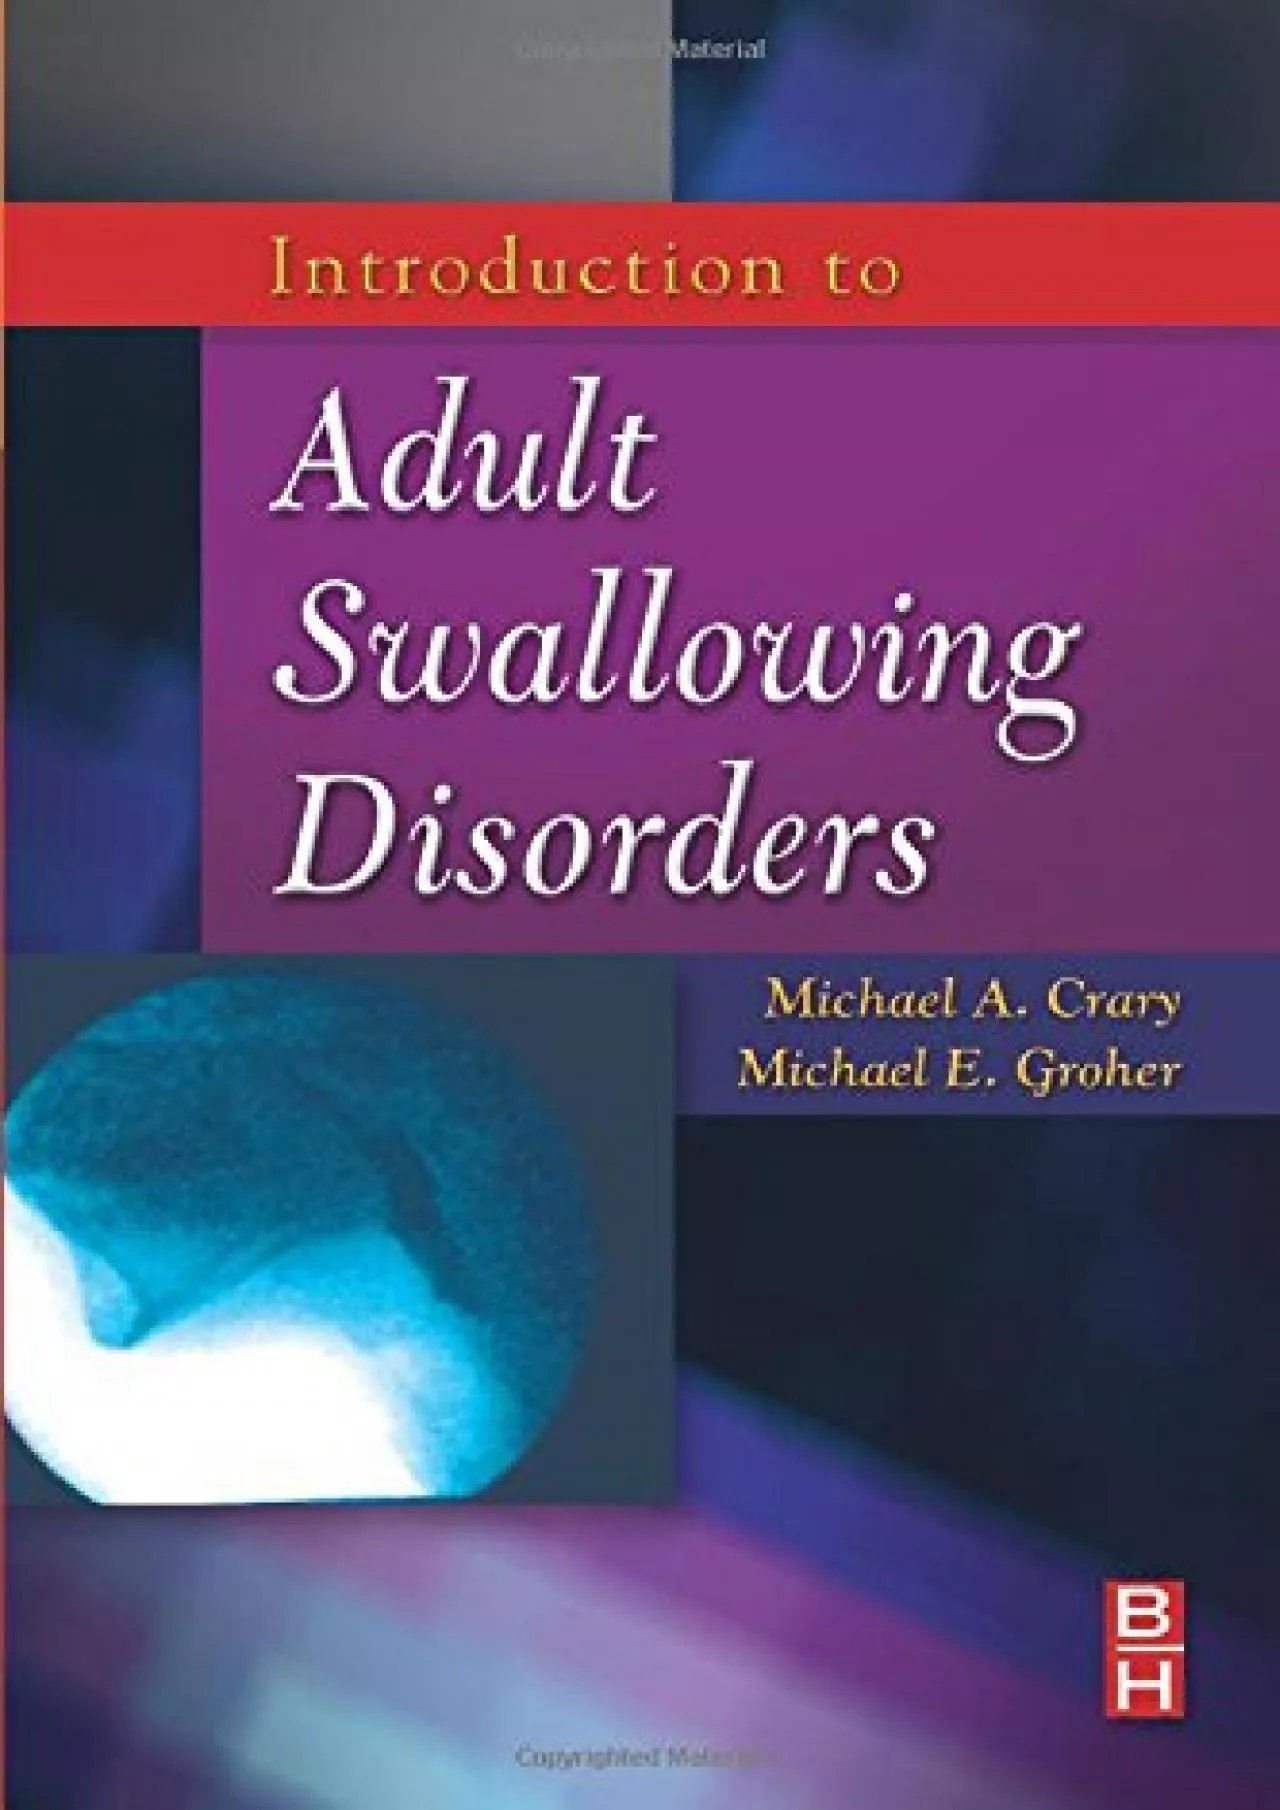 (BOOK)-Introduction to Adult Swallowing Disorders